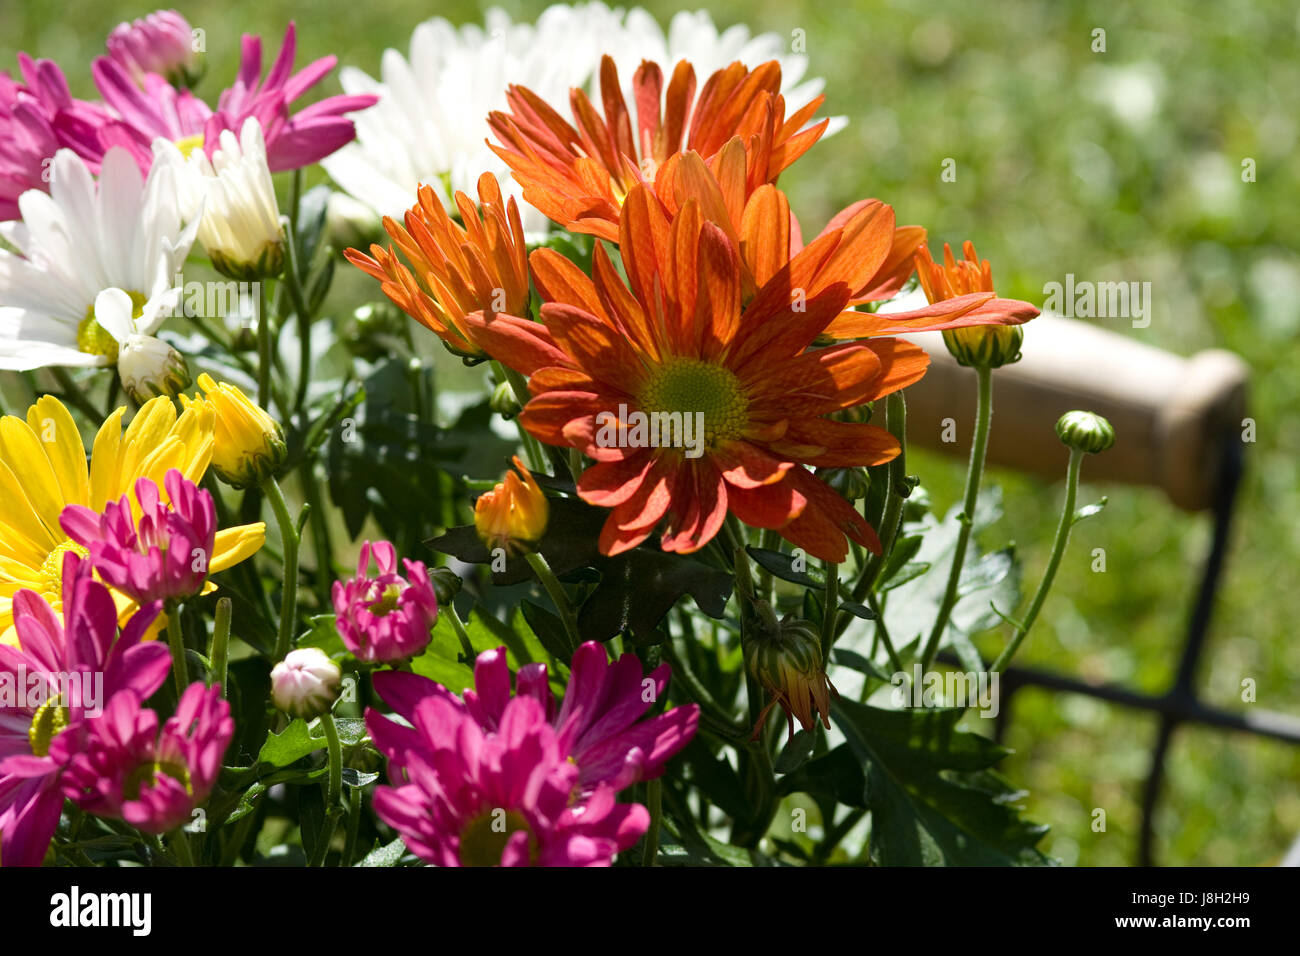 coloured, colourful, gorgeous, multifarious, richly coloured, flower, flowers, Stock Photo